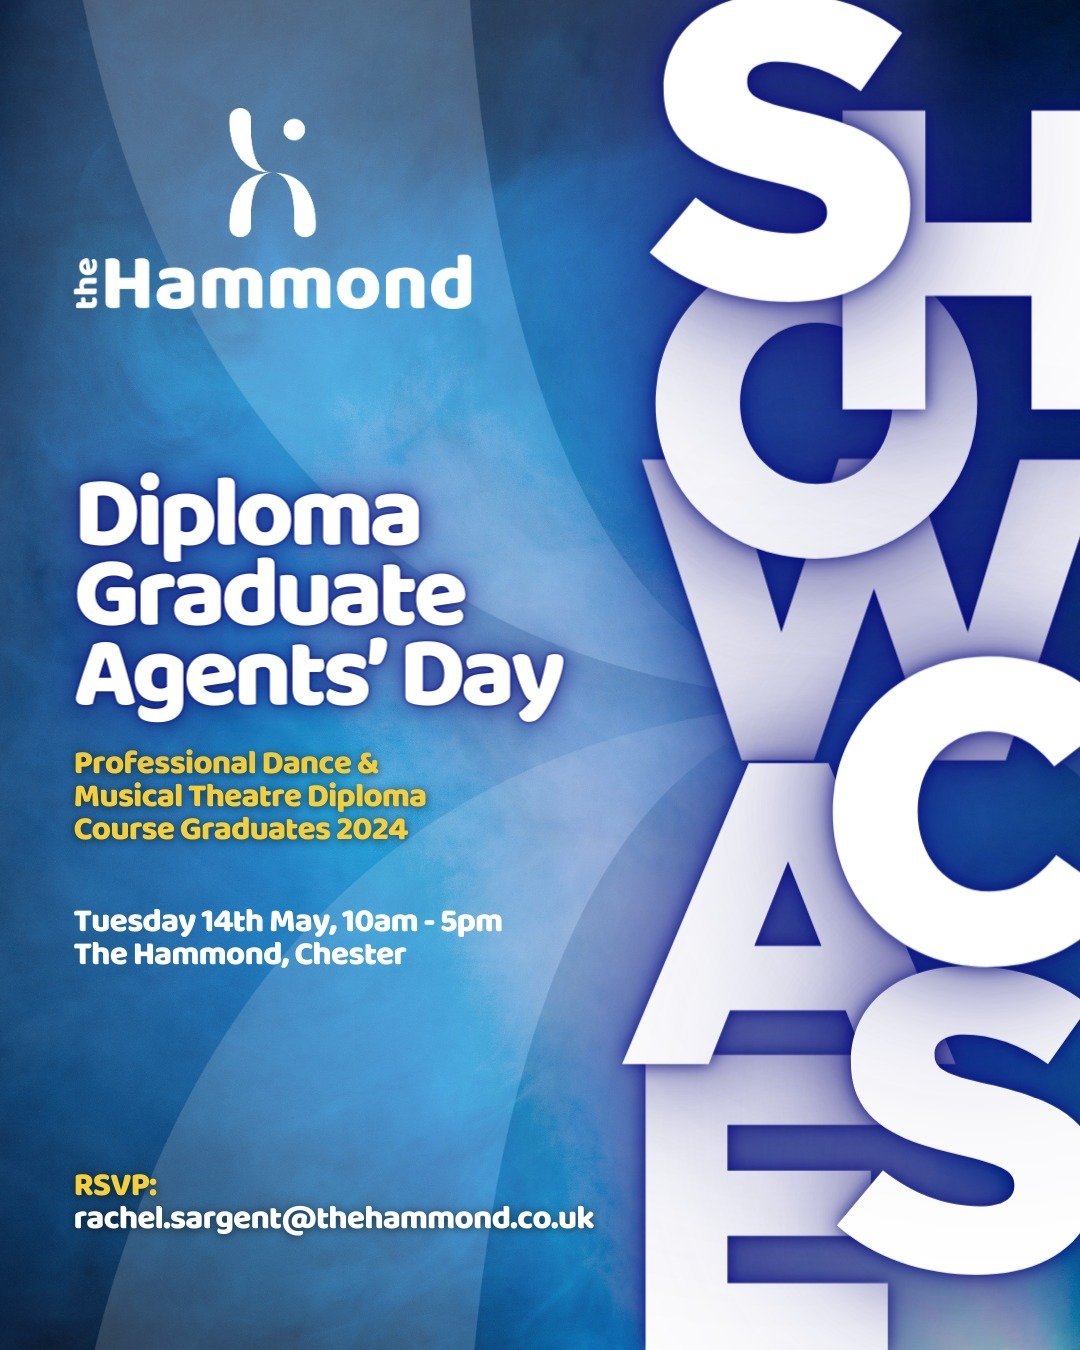 Diploma Graduate Agents' Day 2024 ⤵⁠
⁠
Featuring The Hammond's Professional Dance and Professional Musical Theatre course graduating years. ⁠
⁠
Tuesday 14th May, 10am - 5pm⁠
The Hammond, Chester⁠
⁠
If you&rsquo;re an Agent, Casting Director or Creati